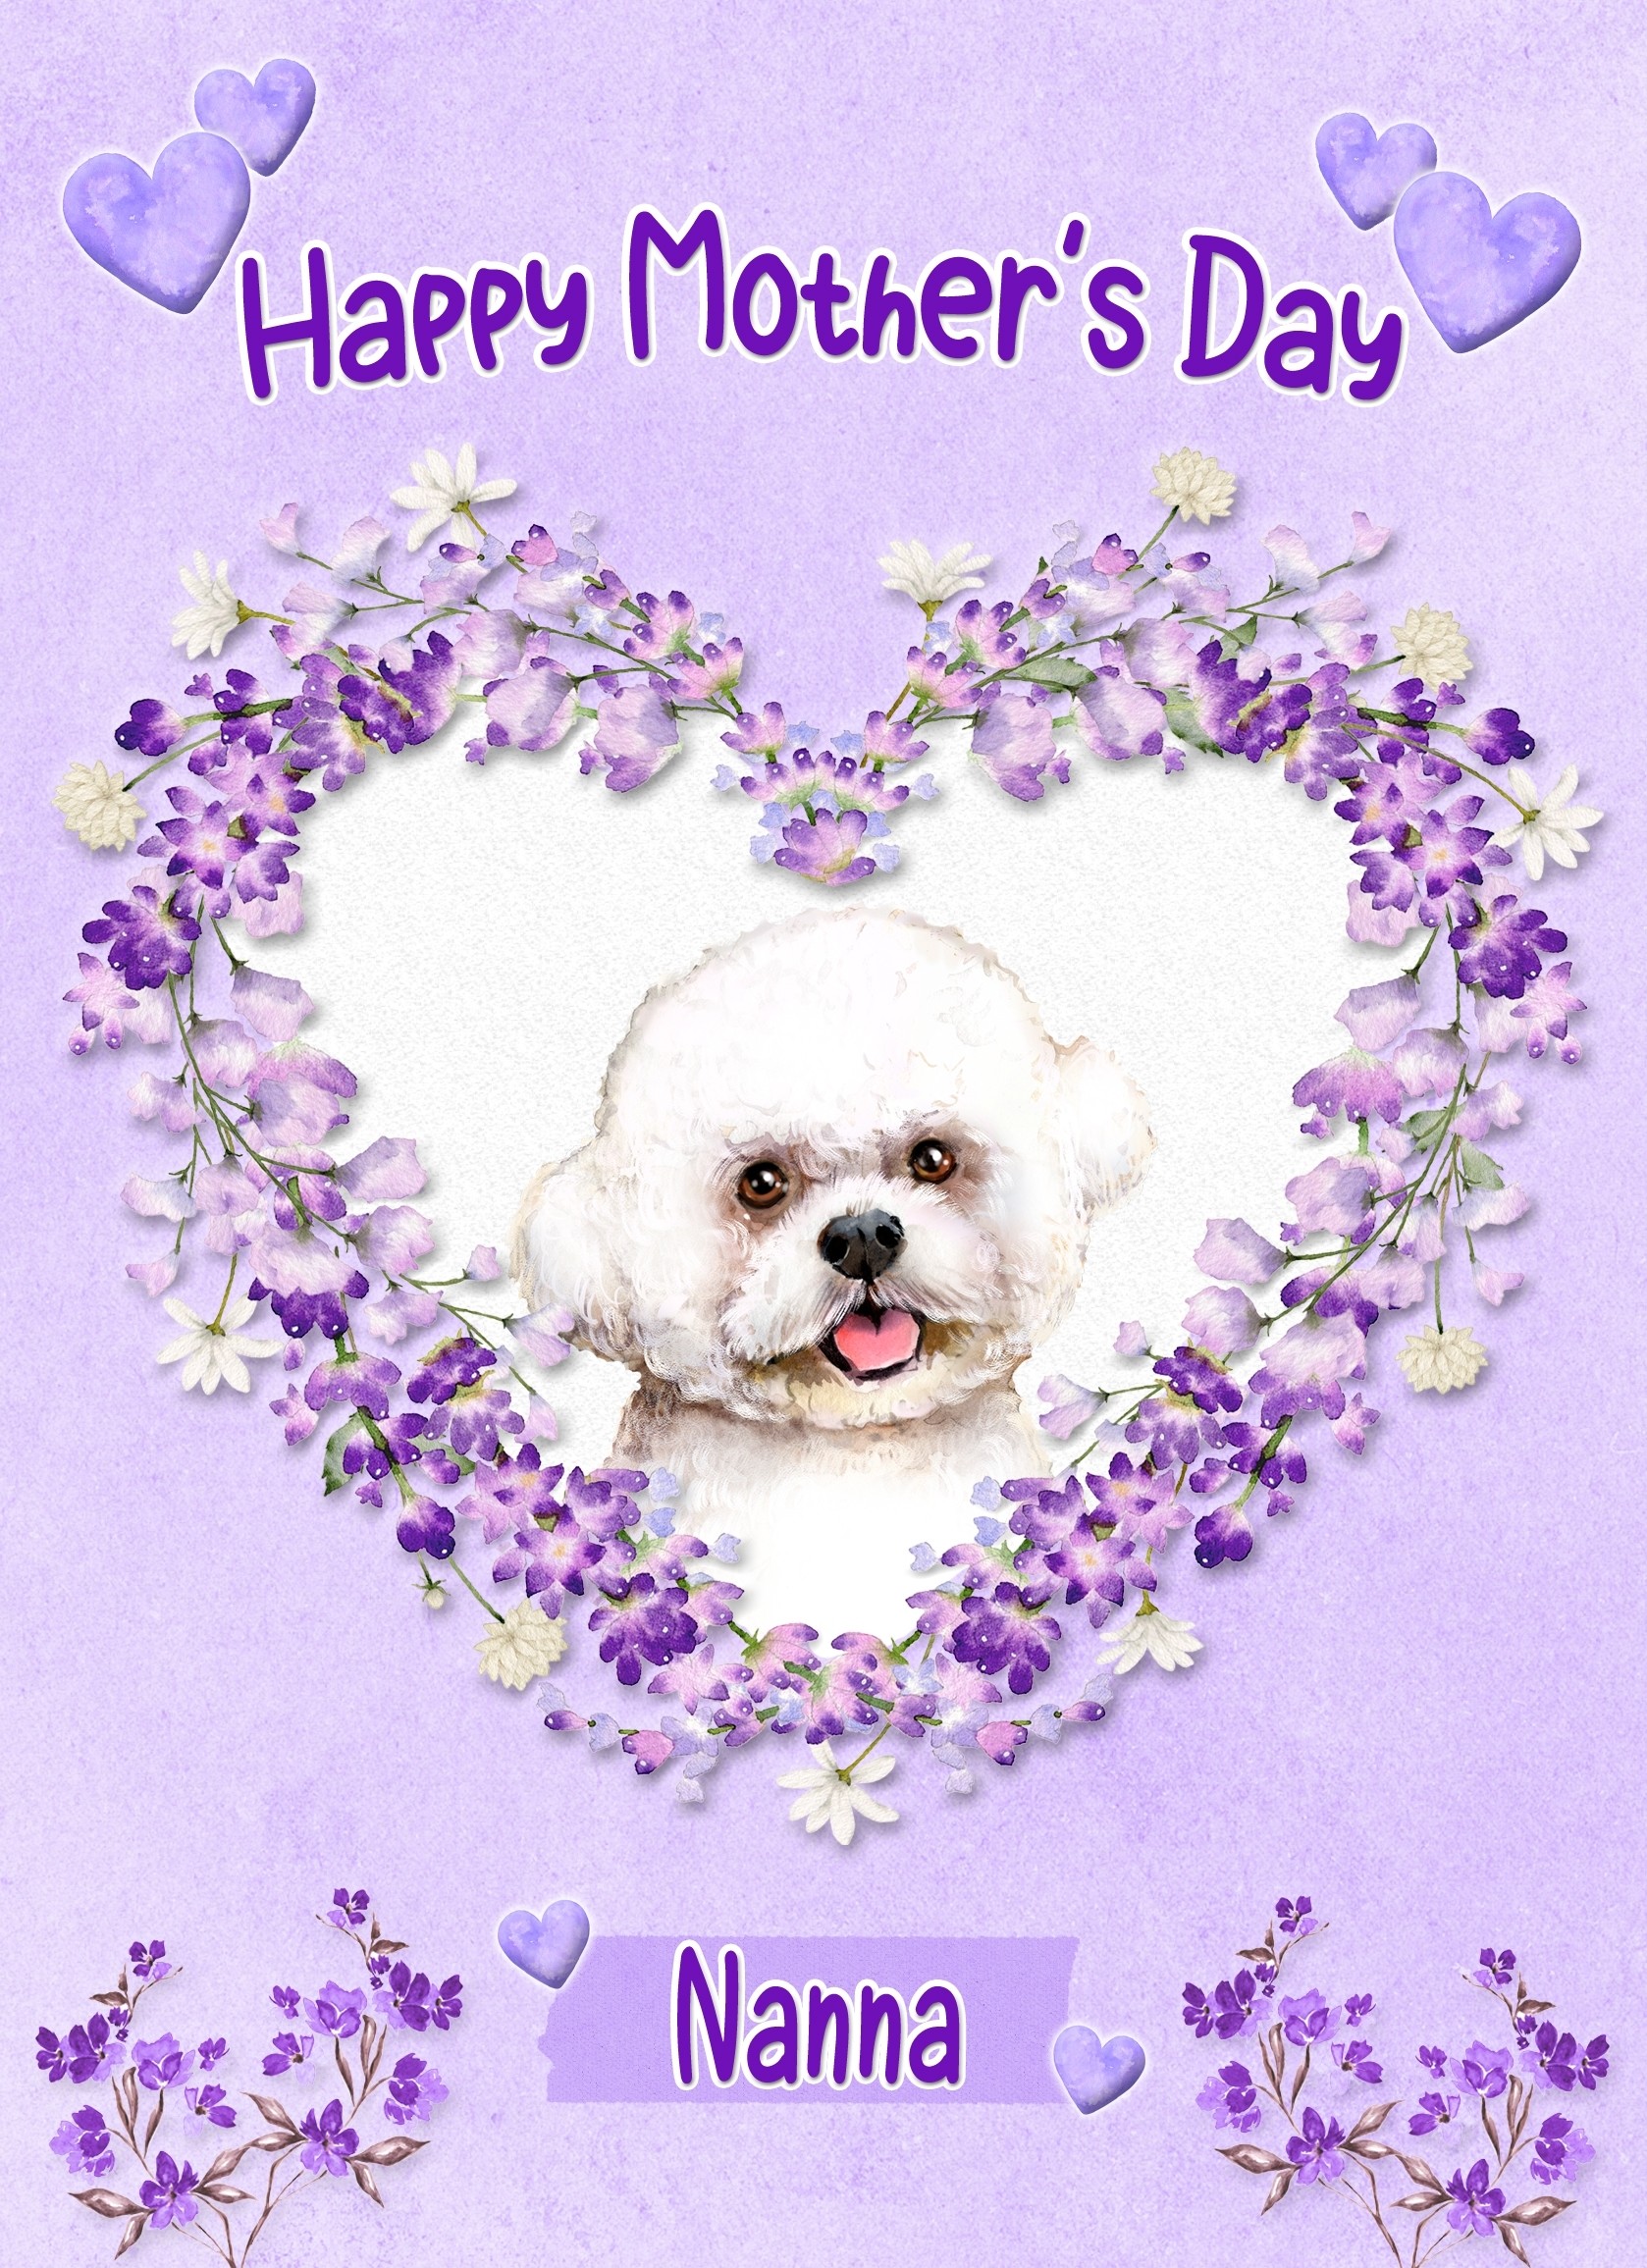 Bichon Frise Dog Mothers Day Card (Happy Mothers, Nanna)